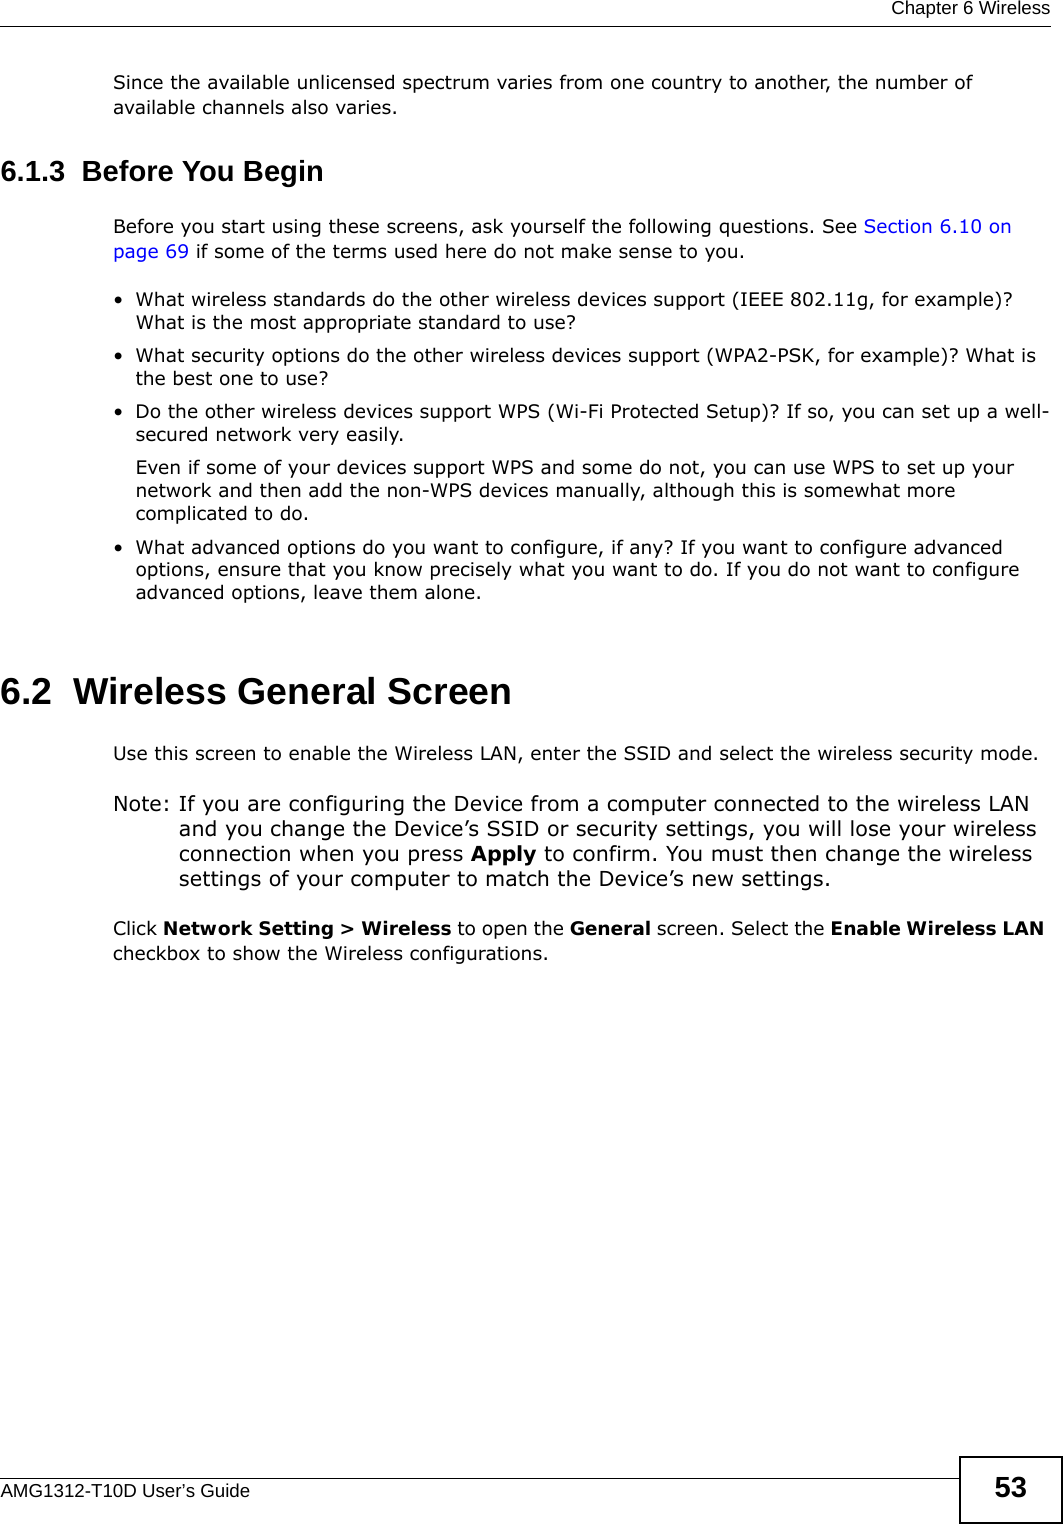  Chapter 6 WirelessAMG1312-T10D User’s Guide 53Since the available unlicensed spectrum varies from one country to another, the number of available channels also varies. 6.1.3  Before You BeginBefore you start using these screens, ask yourself the following questions. See Section 6.10 on page 69 if some of the terms used here do not make sense to you.• What wireless standards do the other wireless devices support (IEEE 802.11g, for example)? What is the most appropriate standard to use?• What security options do the other wireless devices support (WPA2-PSK, for example)? What is the best one to use?• Do the other wireless devices support WPS (Wi-Fi Protected Setup)? If so, you can set up a well-secured network very easily. Even if some of your devices support WPS and some do not, you can use WPS to set up your network and then add the non-WPS devices manually, although this is somewhat more complicated to do.• What advanced options do you want to configure, if any? If you want to configure advanced options, ensure that you know precisely what you want to do. If you do not want to configure advanced options, leave them alone.6.2  Wireless General Screen Use this screen to enable the Wireless LAN, enter the SSID and select the wireless security mode.Note: If you are configuring the Device from a computer connected to the wireless LAN and you change the Device’s SSID or security settings, you will lose your wireless connection when you press Apply to confirm. You must then change the wireless settings of your computer to match the Device’s new settings.Click Network Setting &gt; Wireless to open the General screen. Select the Enable Wireless LAN checkbox to show the Wireless configurations.